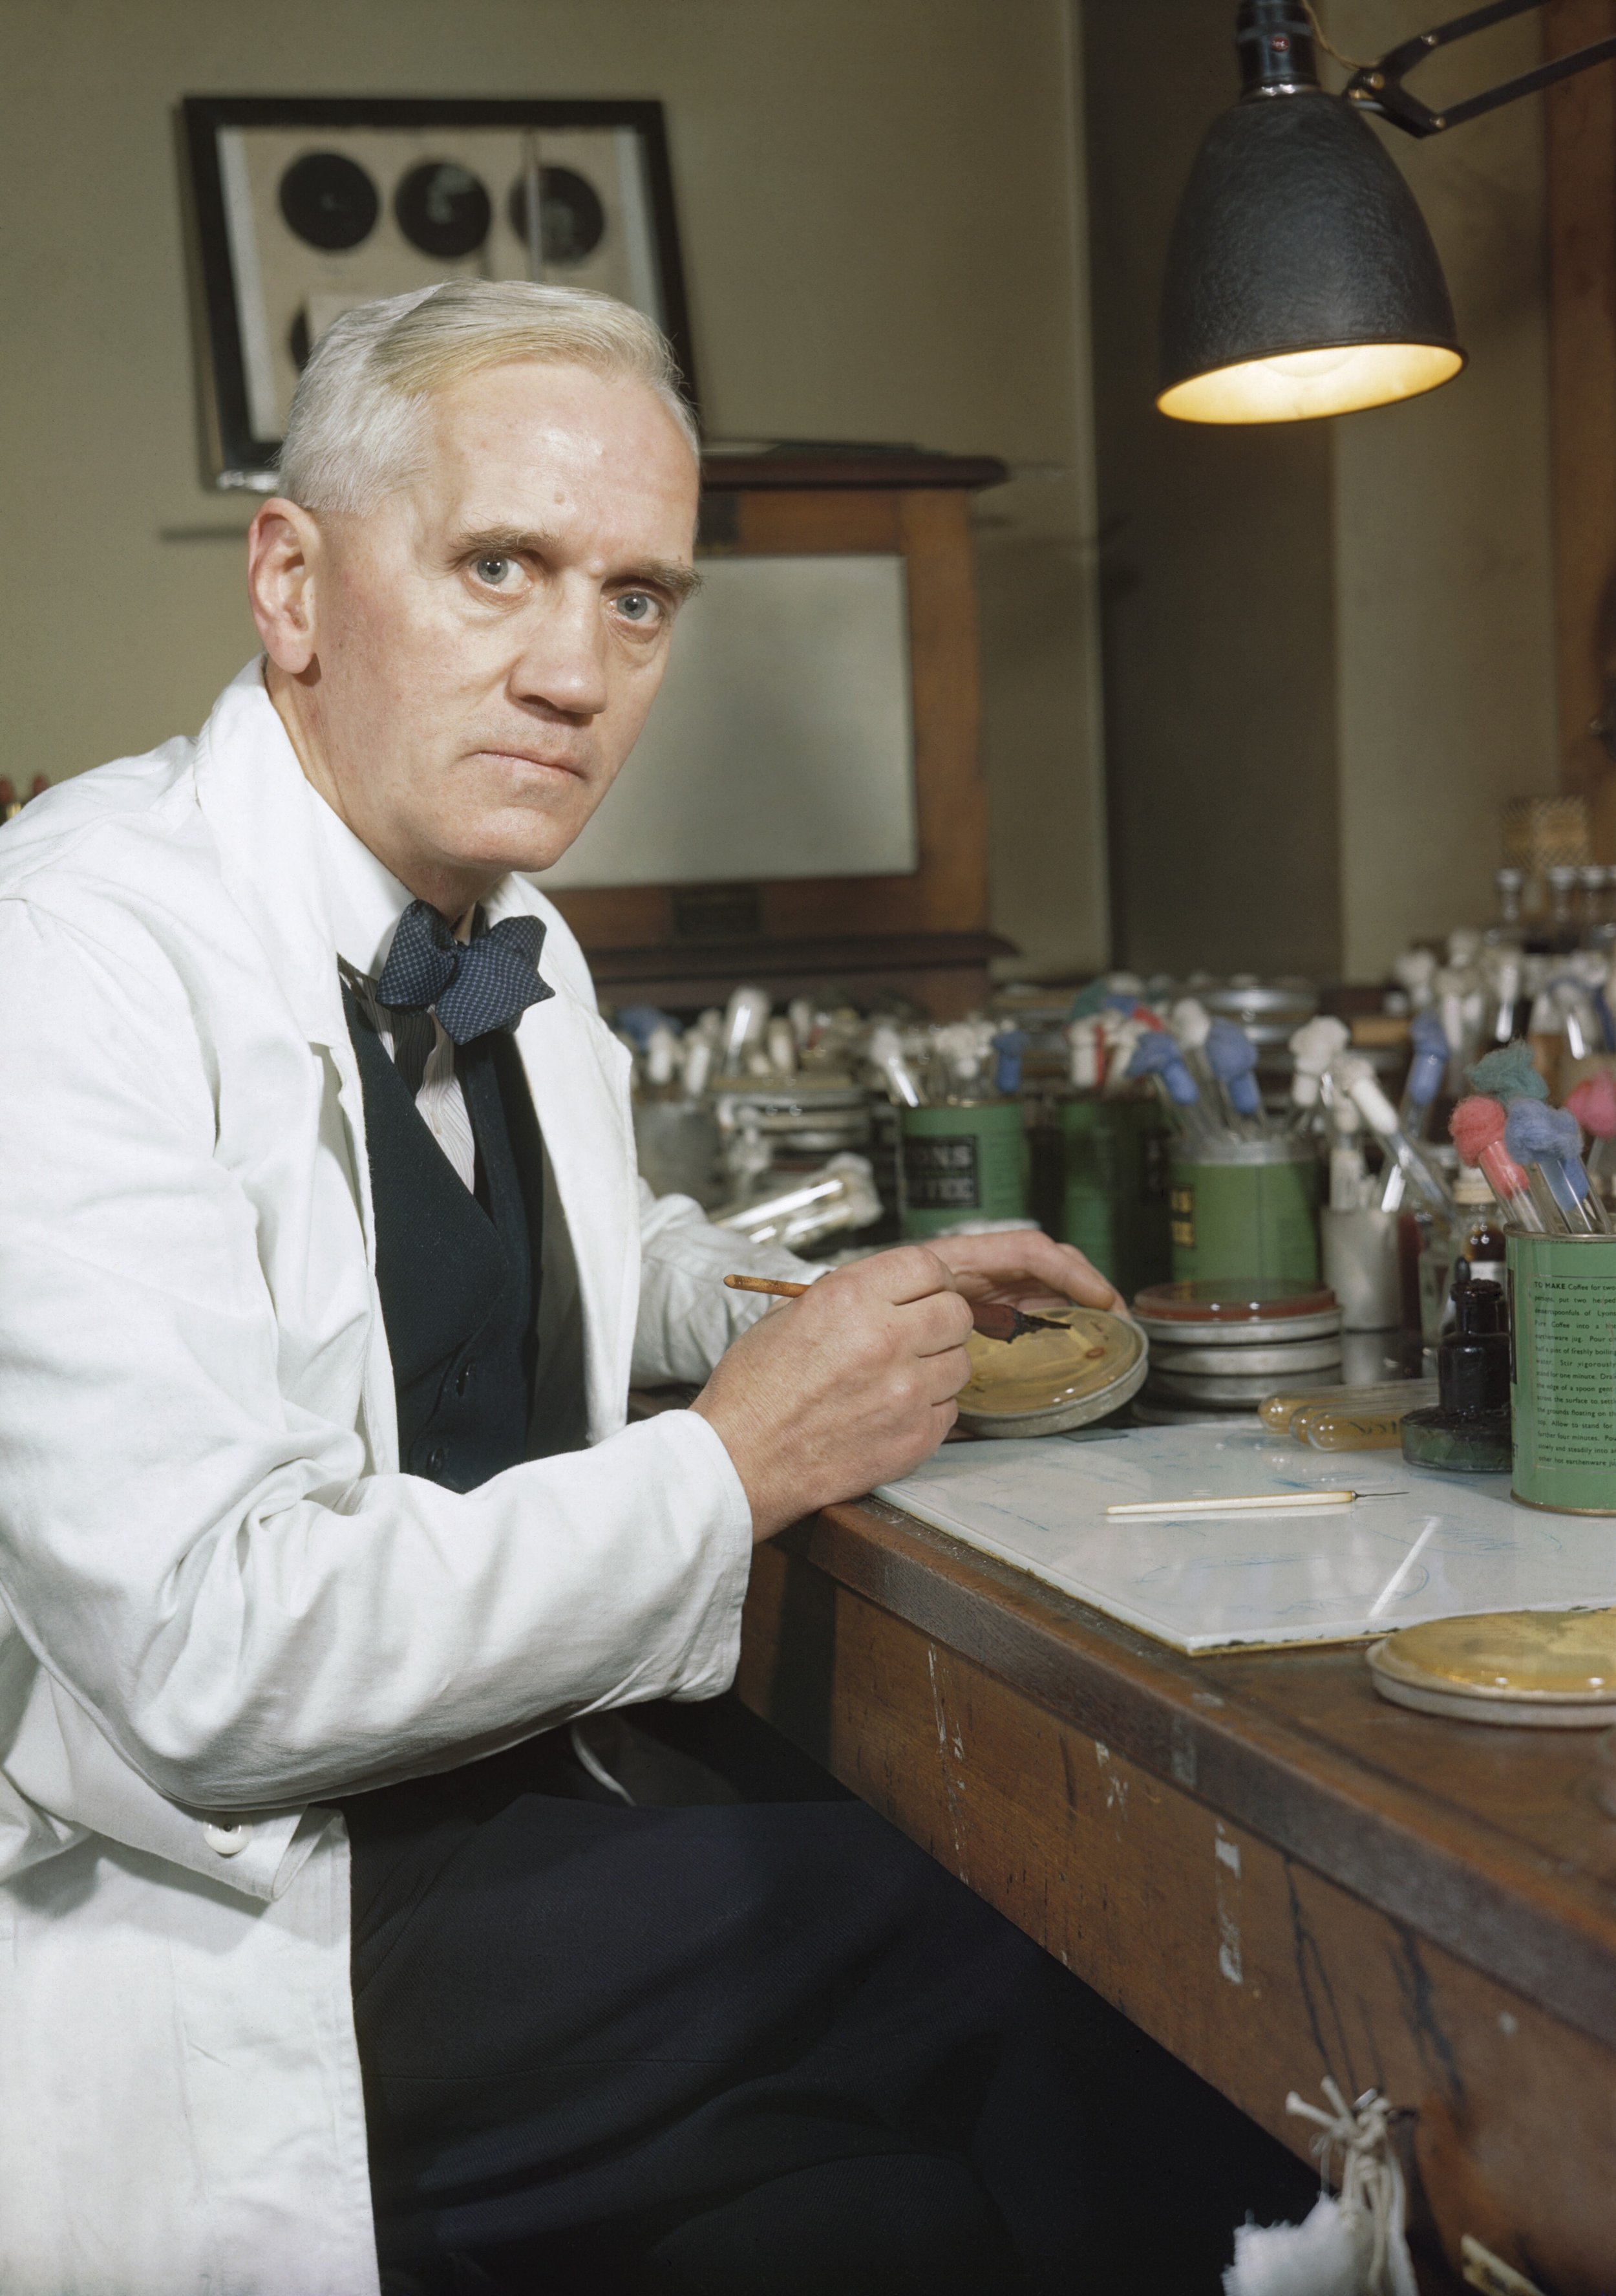 Sir Alexander Fleming, looking rather intense for the photographerBy Official photographer - http://media.iwm.org.uk/iwm/mediaLib//32/media-32192/large.jpgThis is photograph TR 1468 from the collections of the Imperial War Museums., Public Domain, h…